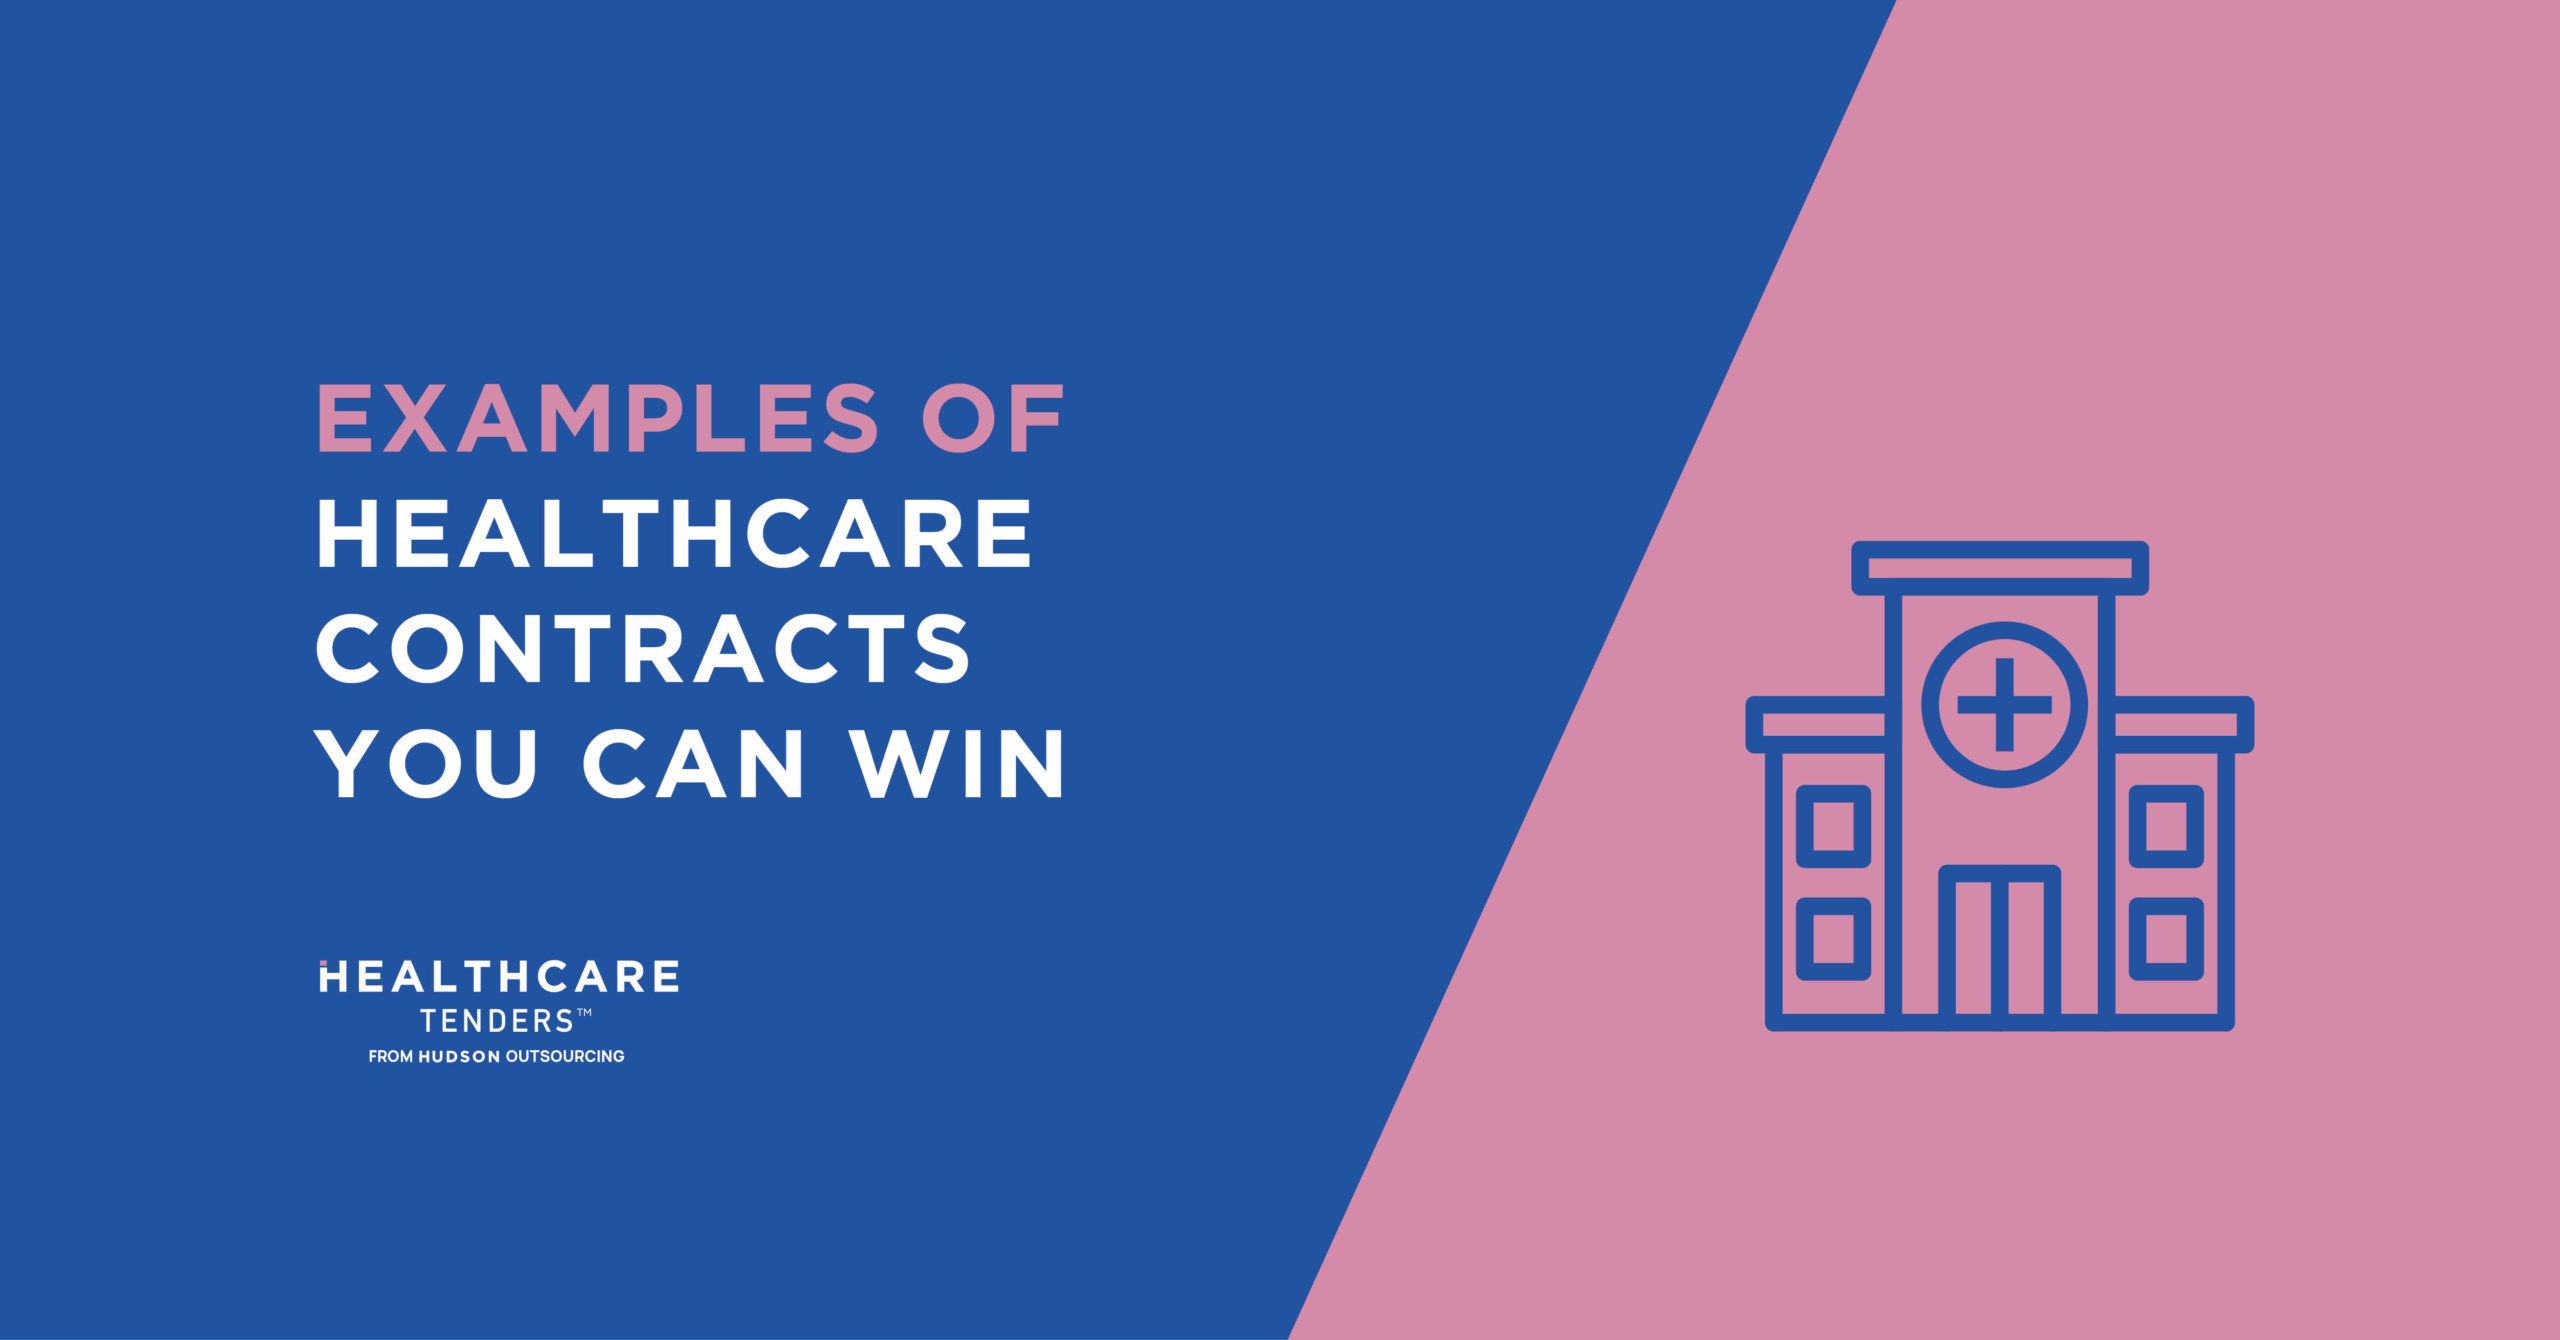 Examples of Healthcare Contracts You Can Win